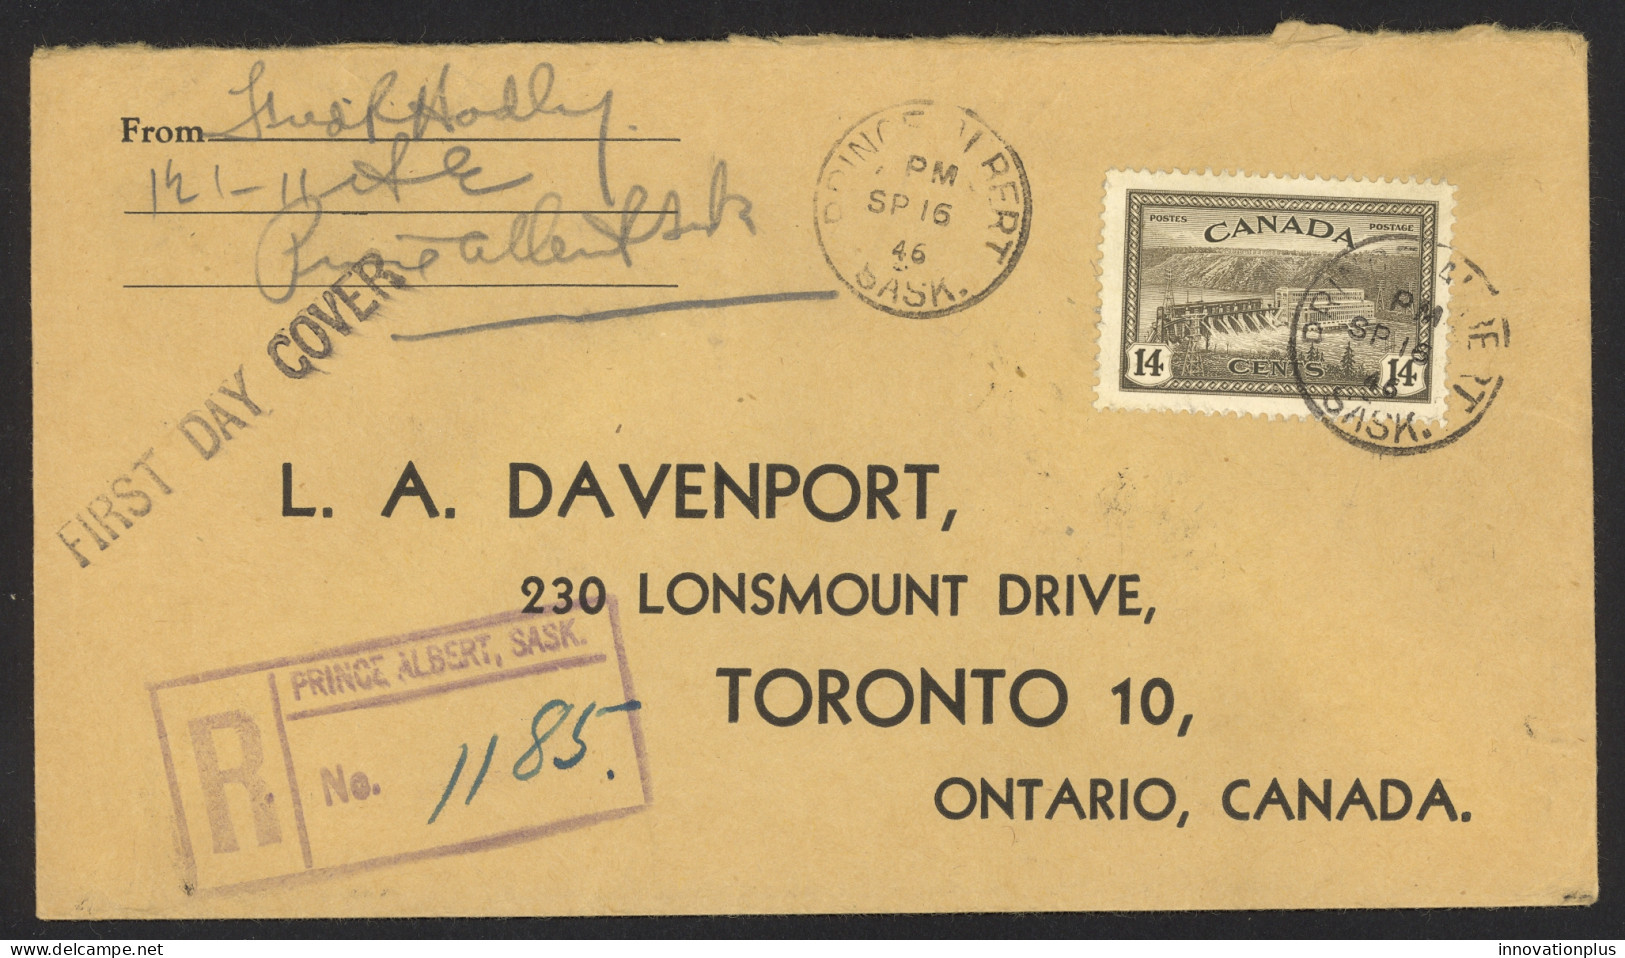 Canada Sc# 270 FDC (a) (Registered) 1946 9.16 KGVI Peace Issue - ....-1951